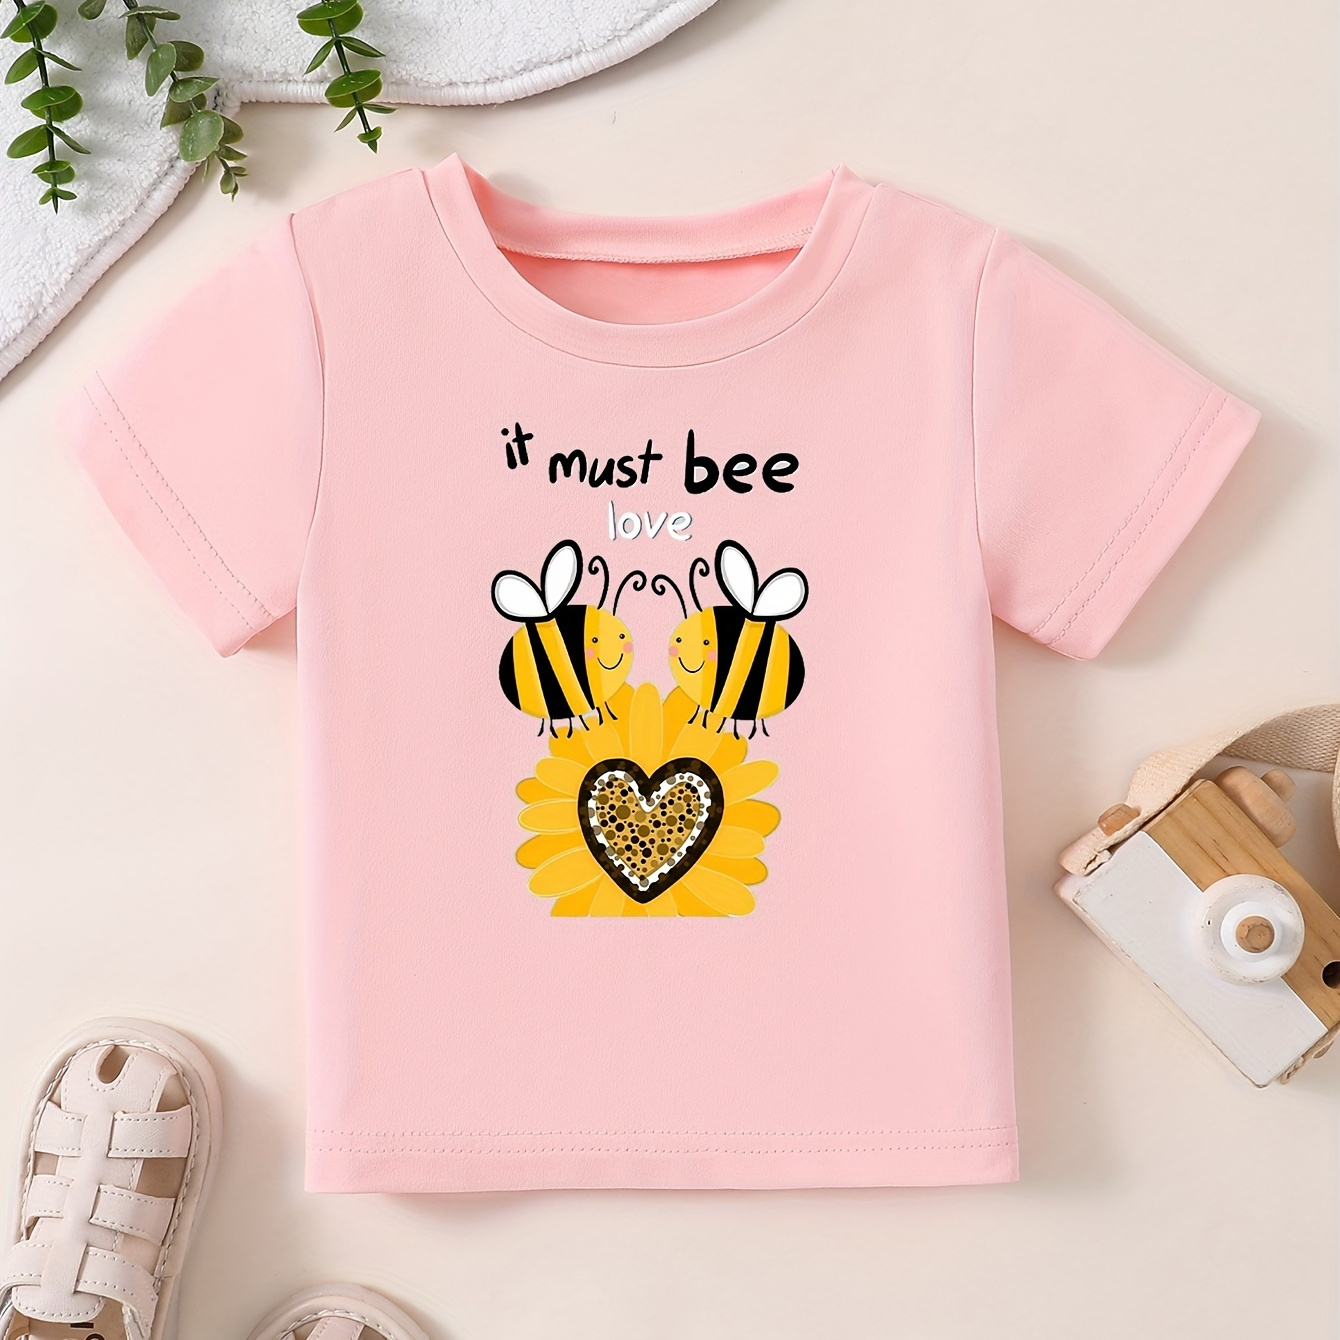 

Letter And Anime Bees And Sunflower Graphic Print, Girls' Casual 95% Cotton Short-sleeve T-shirt Pullover For Spring And Summer For Outdoor Activities